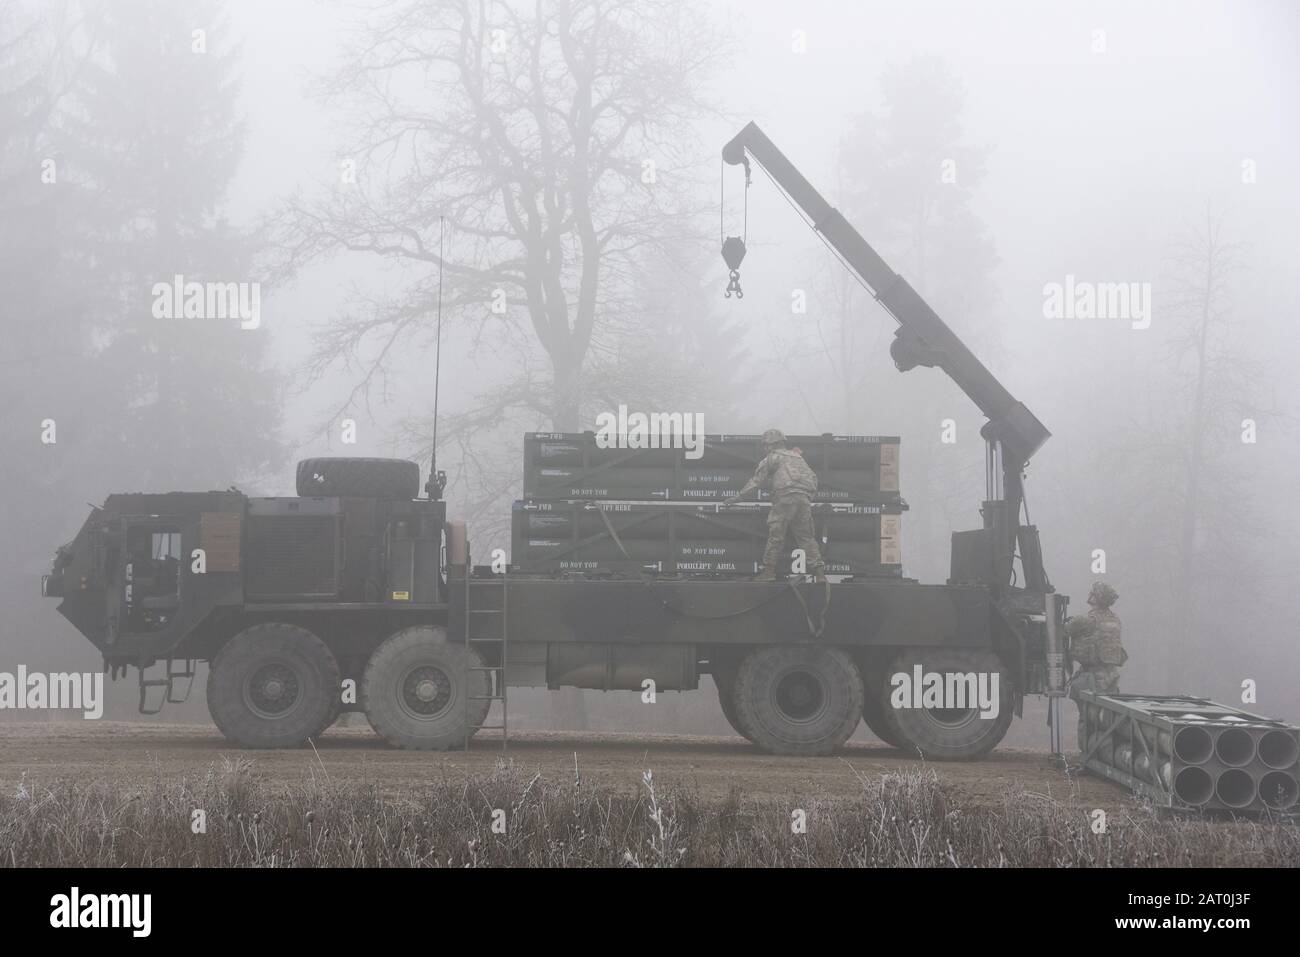 U.S. Soldiers, assigned to 1st Battalion, 6th Field Artillery Regiment, 41st Field Artillery Brigade, unload M270A1 Multiple Launch Rocket System (MLRS) rocket pod containers during a live-fire exercise at 7th Army Training Command's Grafenwoehr Training Area, Grafenwoehr, Germany, Jan. 27, 2020. This is the first live-fire exercise from a European based U.S. Army MLRS unit since 2004. (U.S. Army photo by Markus Rauchenberger) Stock Photo